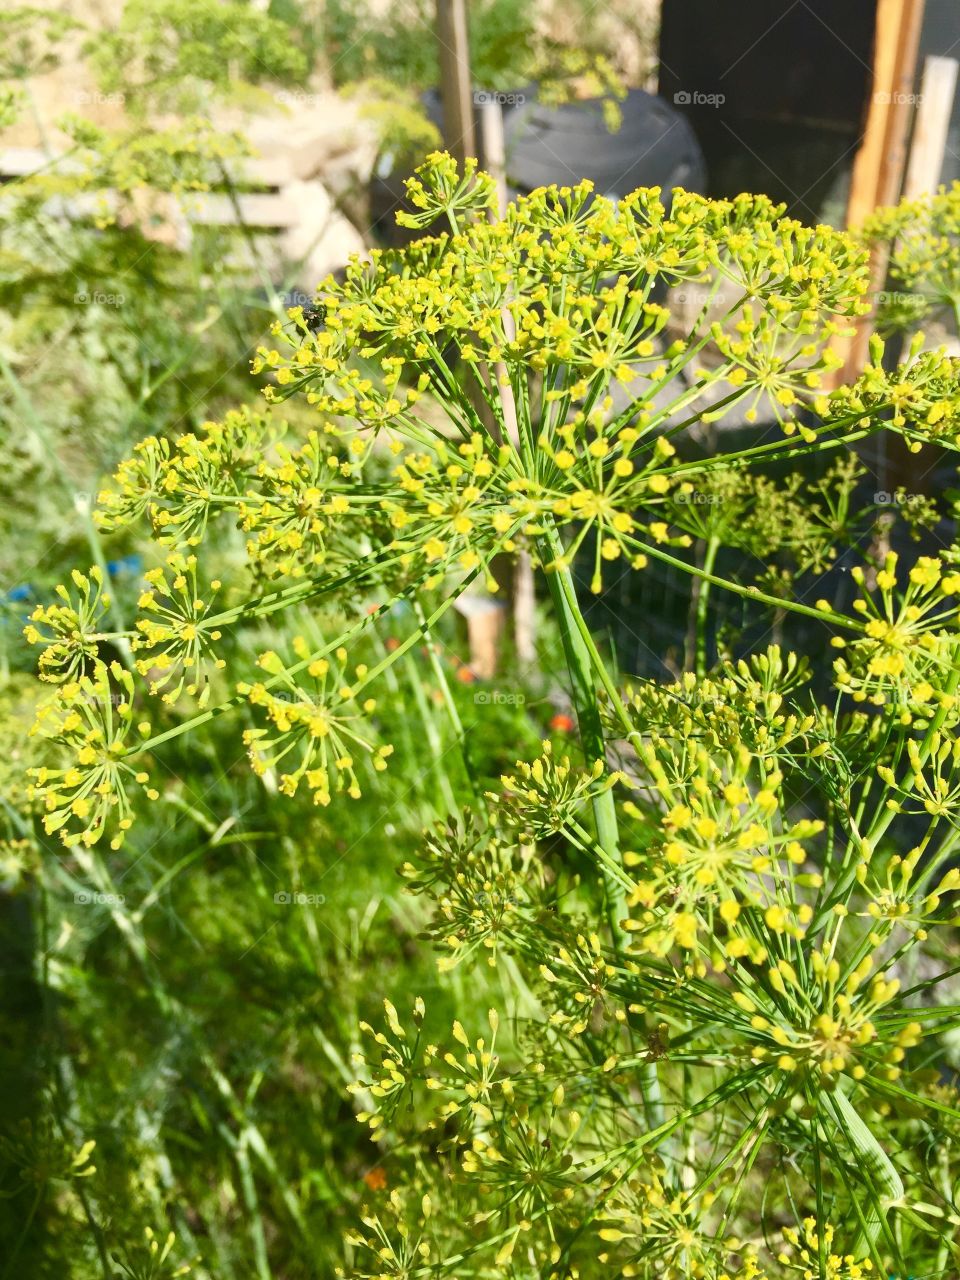 Dill Weed in the garden box